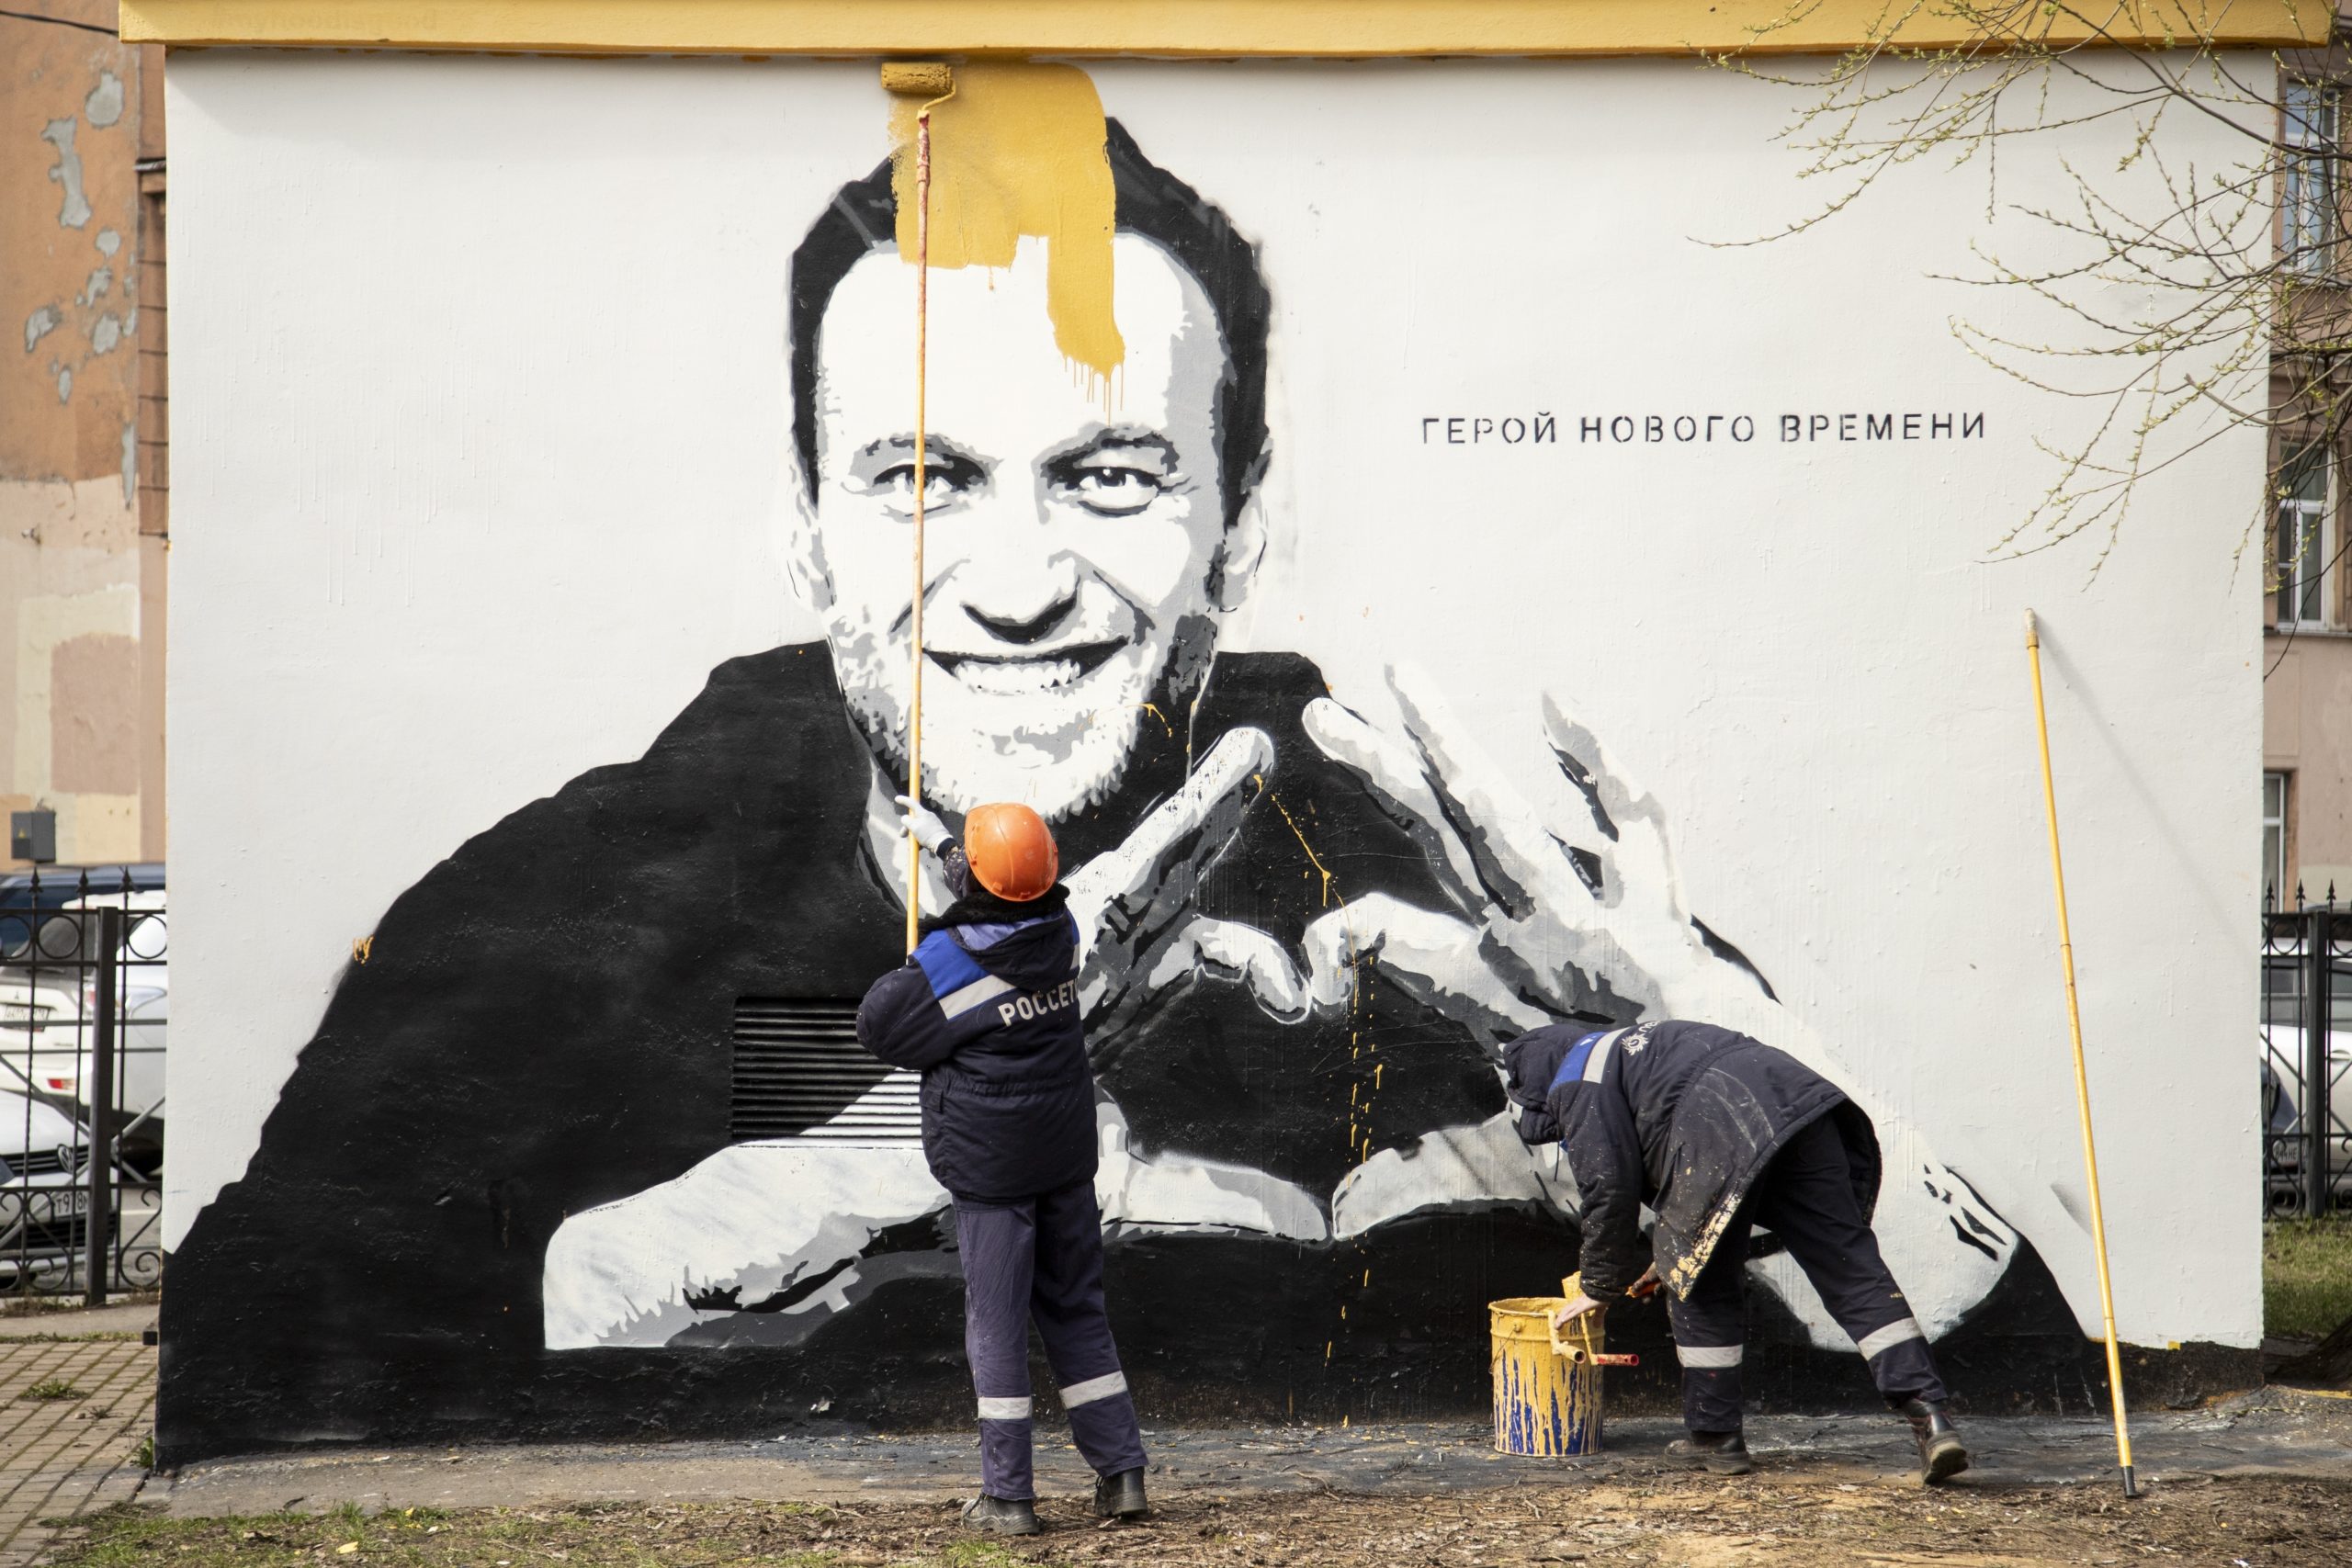 Municipal workers paint over graffiti of Russia's imprisoned opposition leader Alexei Navalny in St. Petersburg, Russia, on, April 28, 2021. The words on the wall read "Hero of our time"